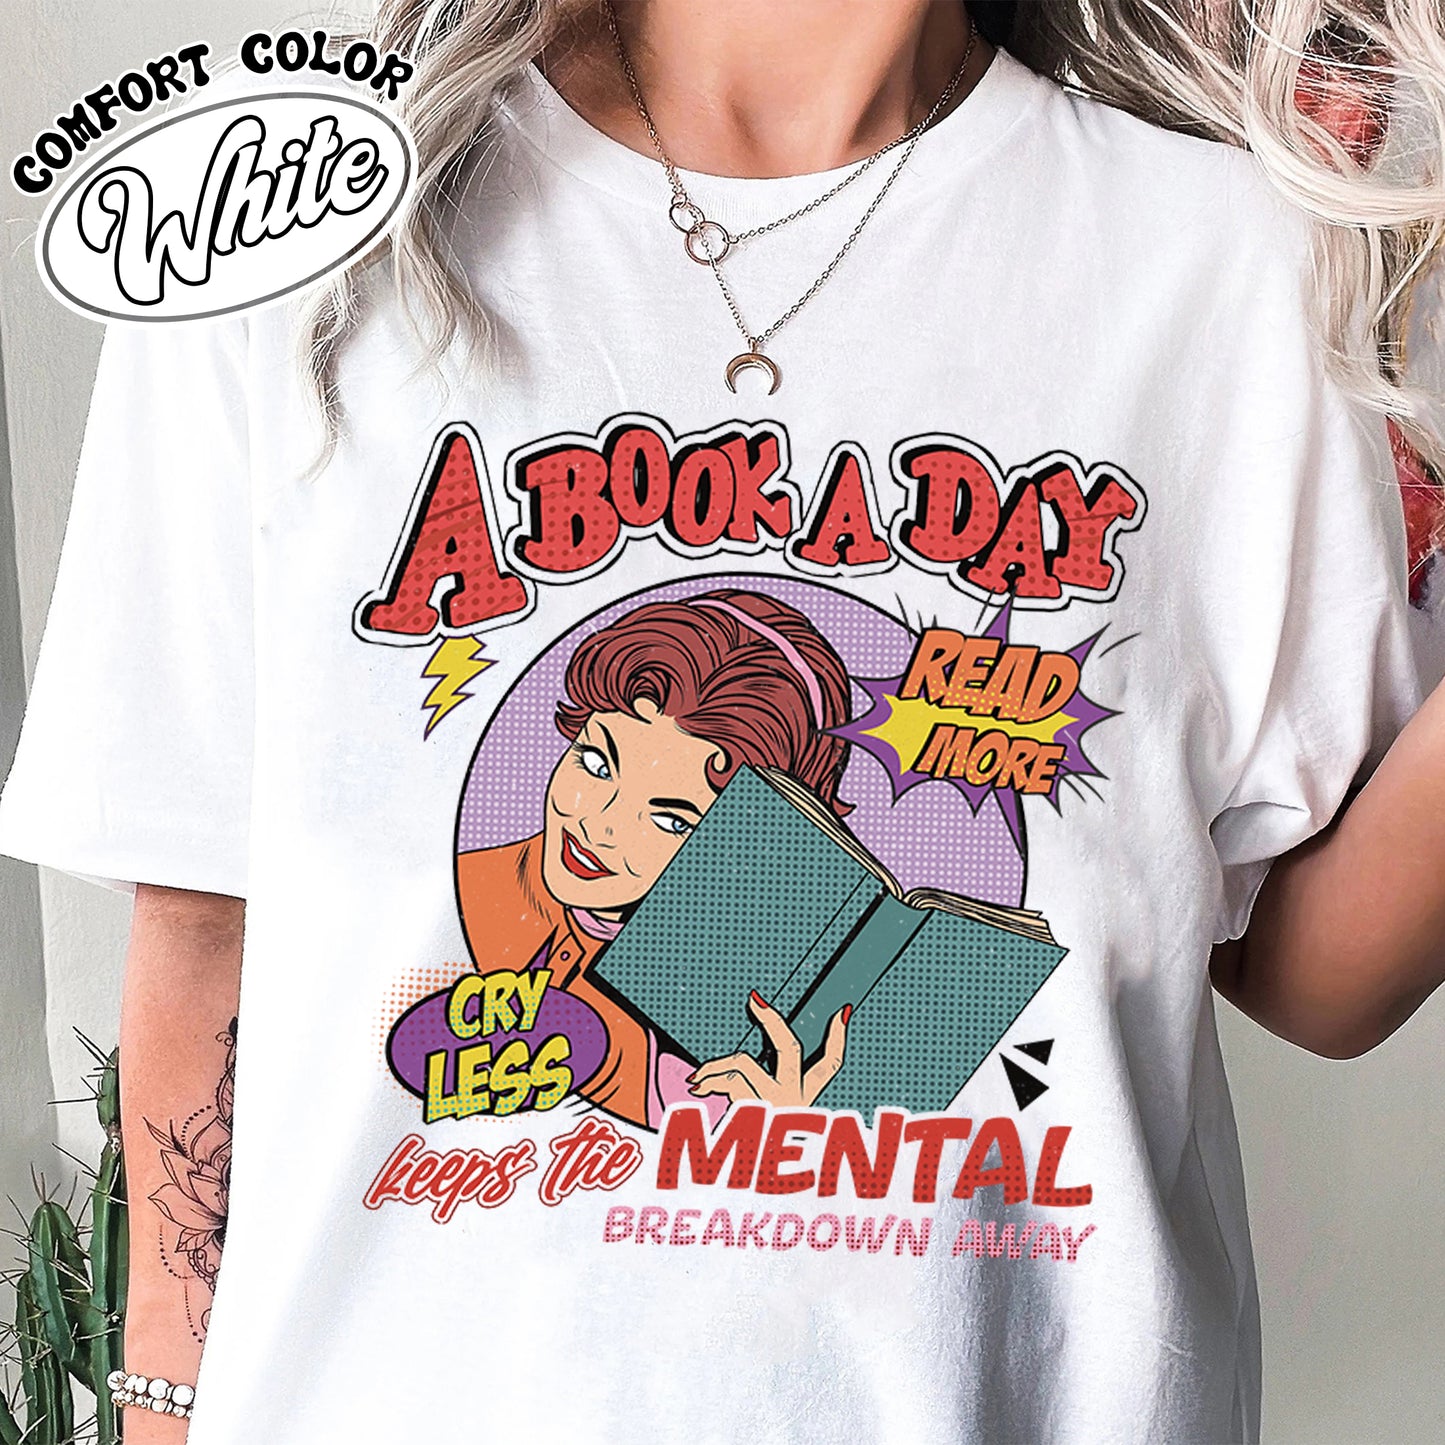 A Book a Day Keep the Mental Breakdown Away Comfort Color Shirt, Book Shirt, Book Gift, Book Lover Gift